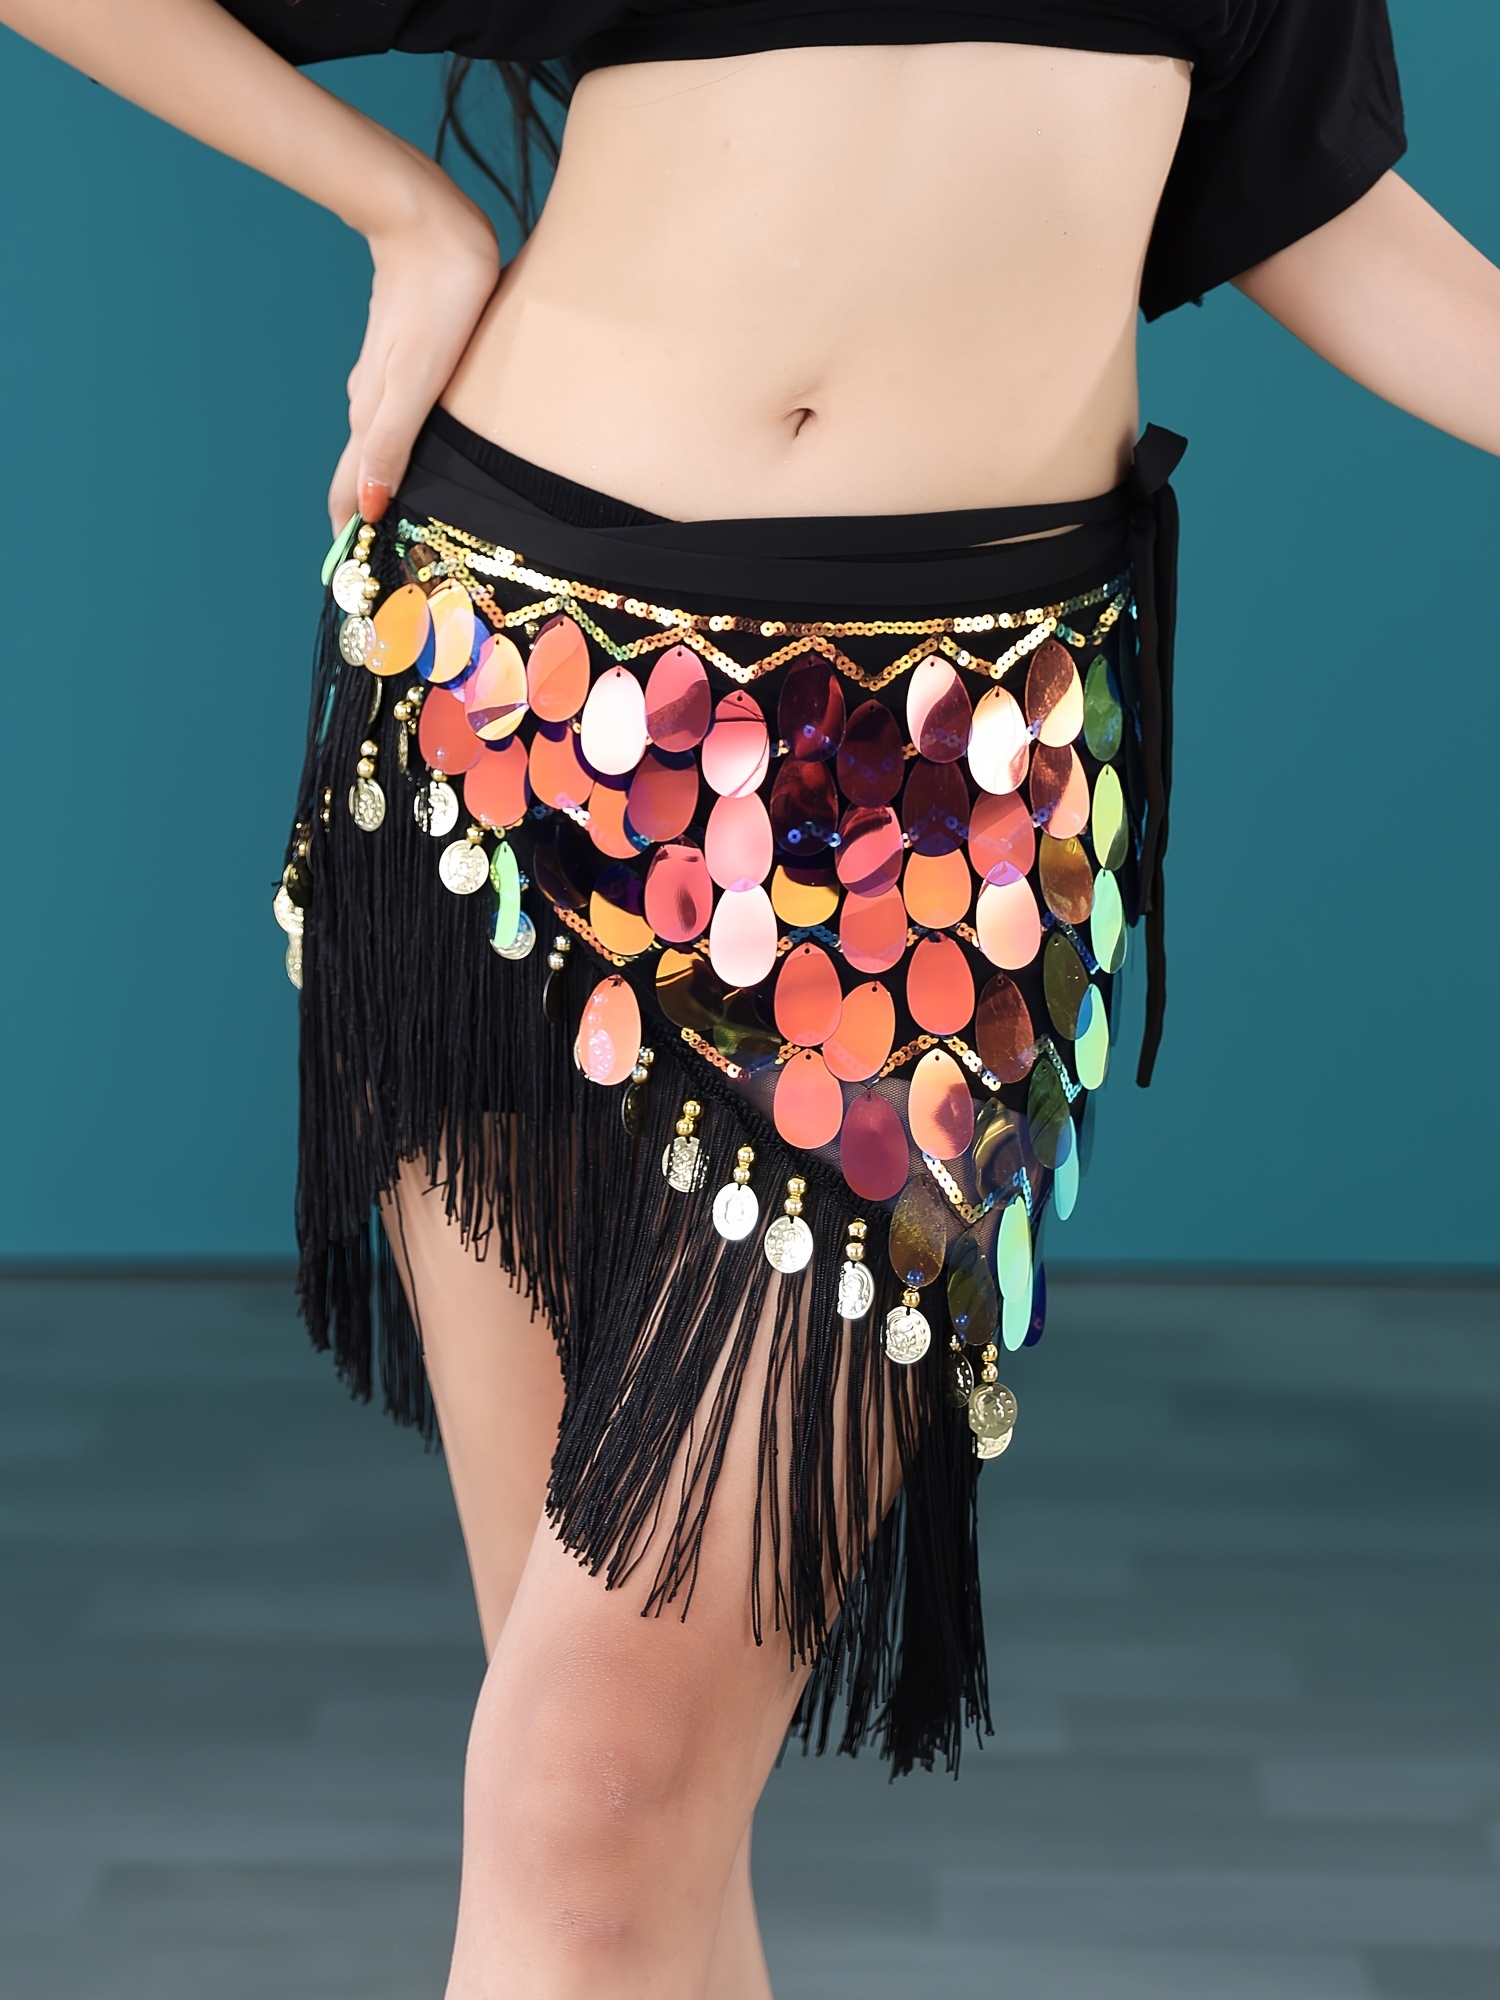 Women's Belly Dance Hip Scarf Performance Outfits Skirt Festival